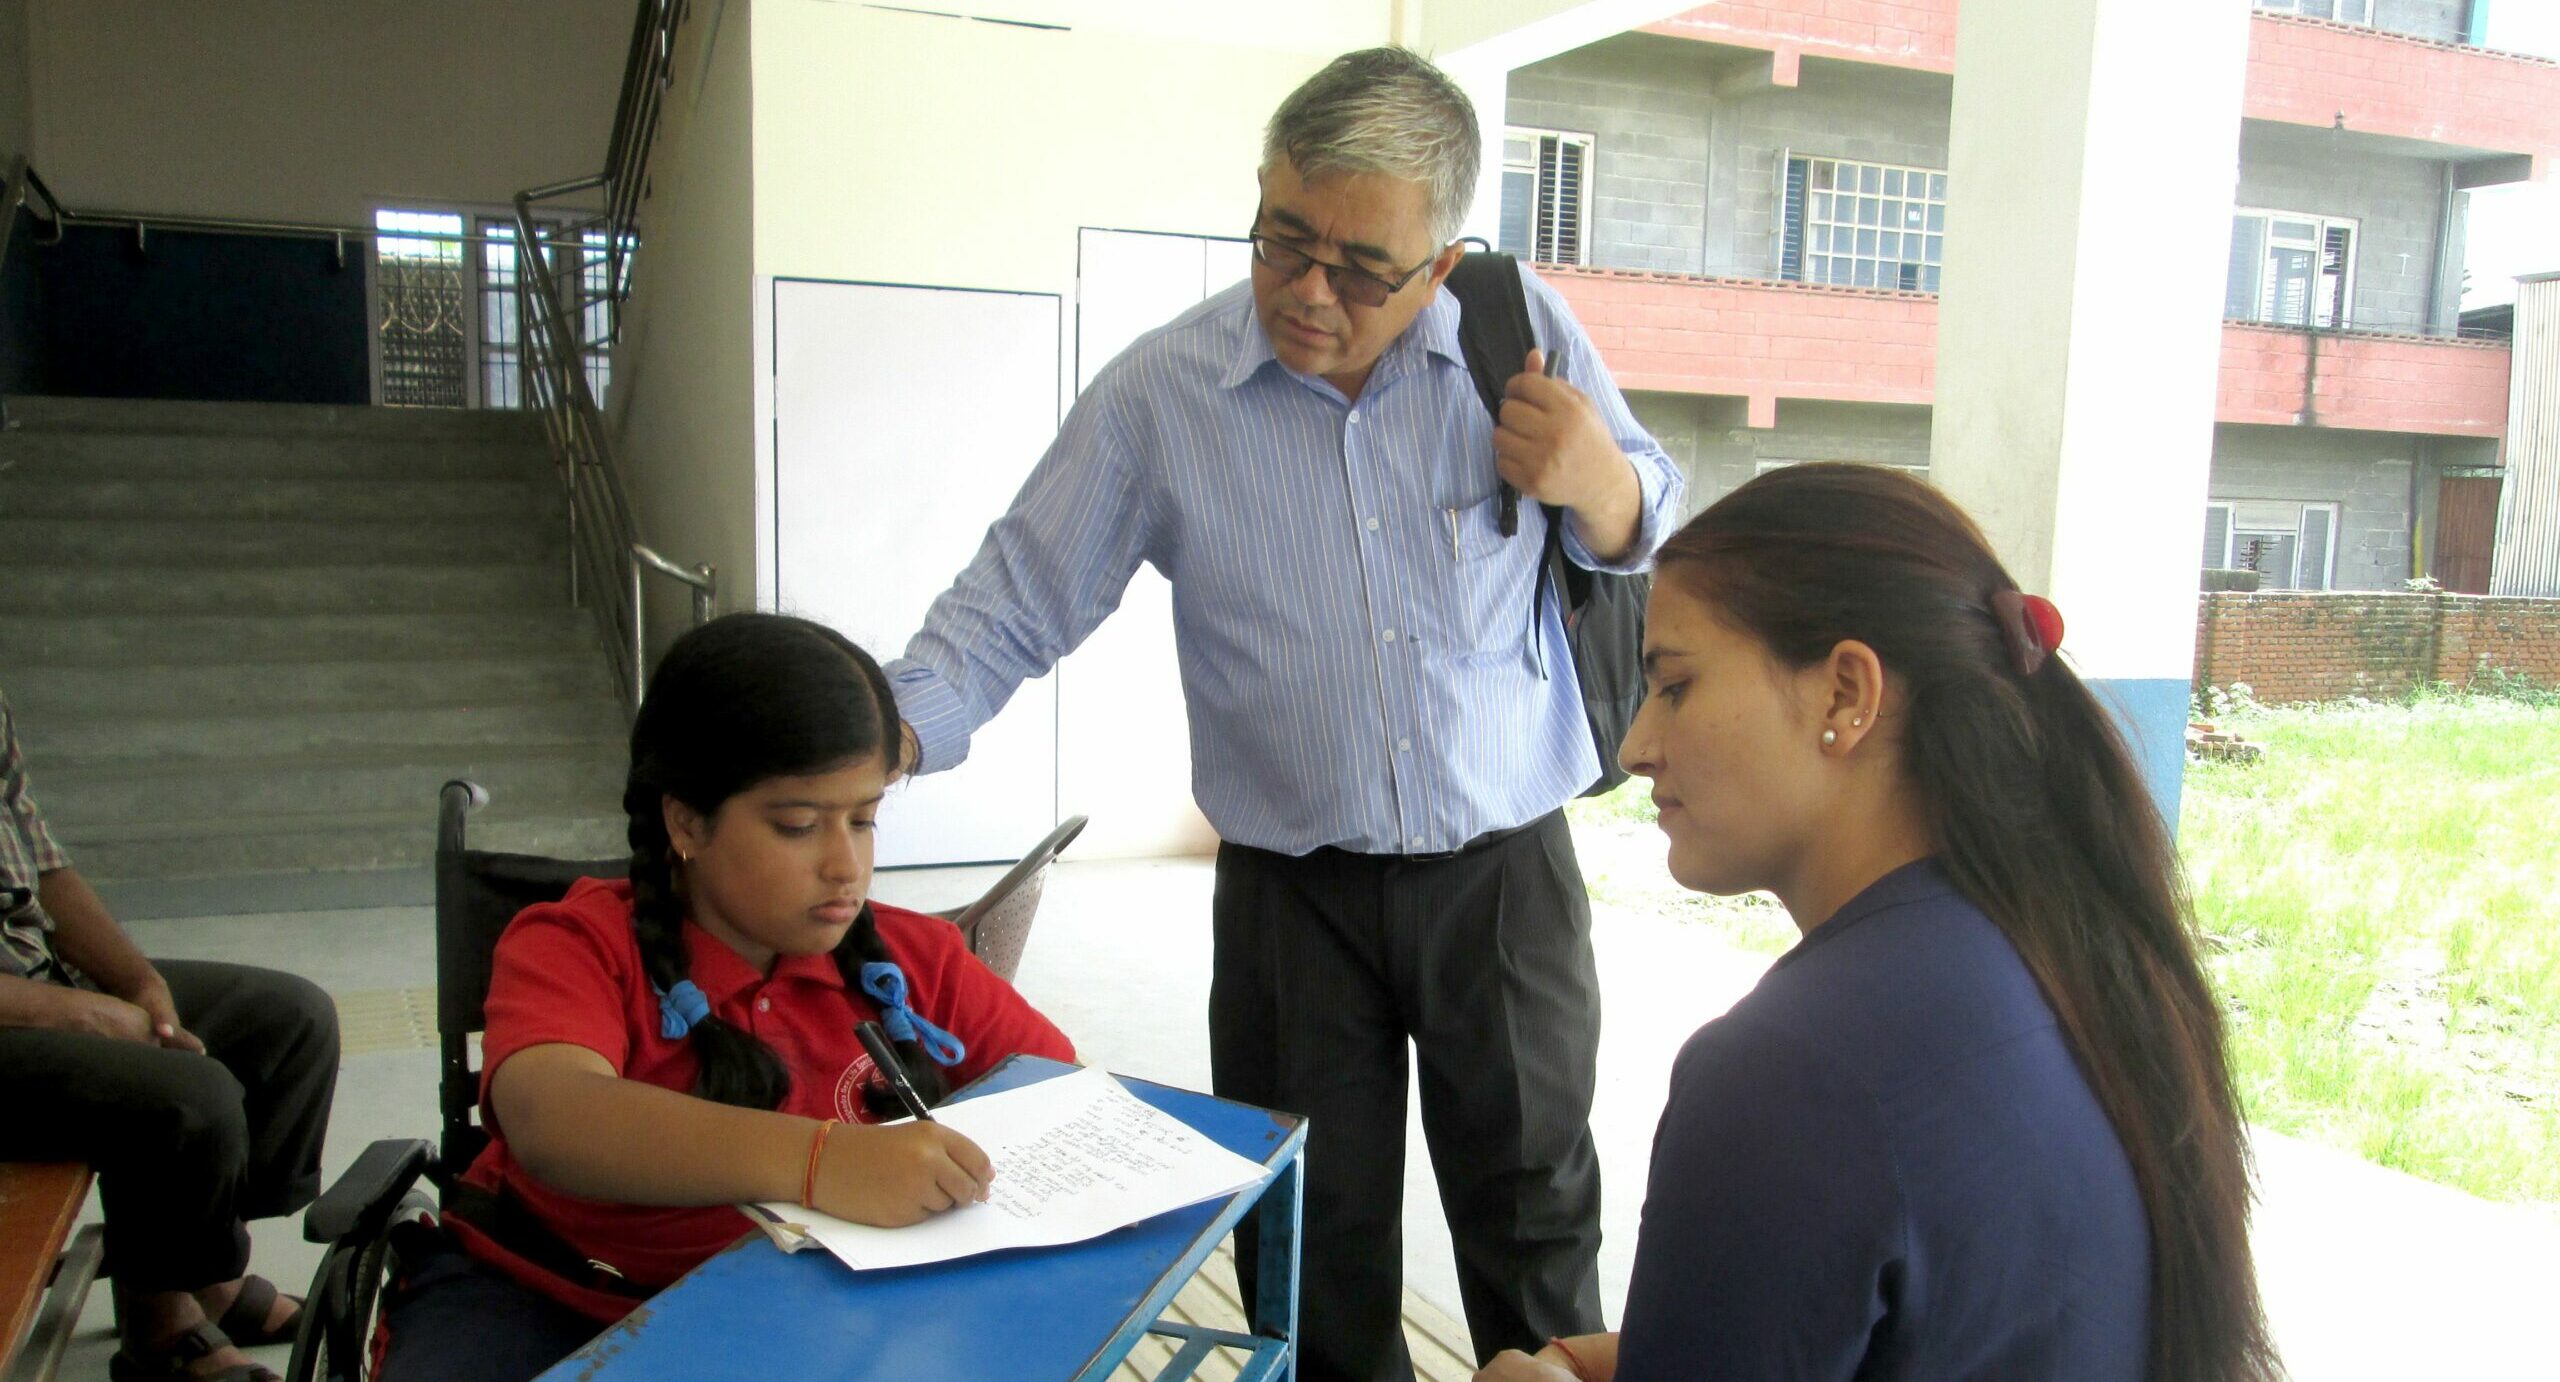 A young girl in a wheelchair works on a worksheet, seated across the table from a teacher. The girl's father stands behind, holding her backpack and placing an encouraging hand on her shoulder.